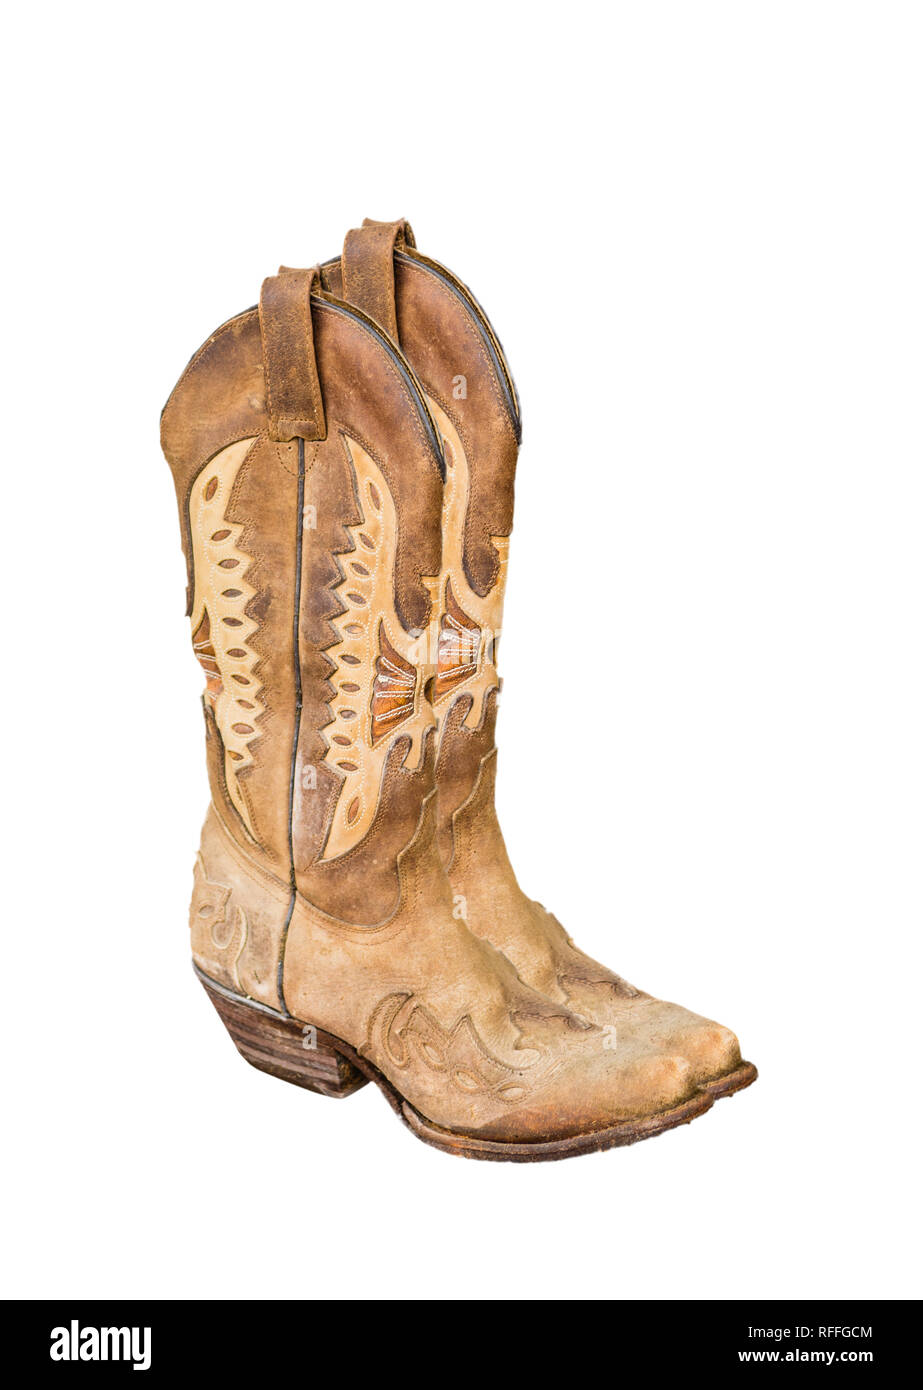 pair of new cowboy boots brown and yellow isolate against white background  Stock Photo - Alamy